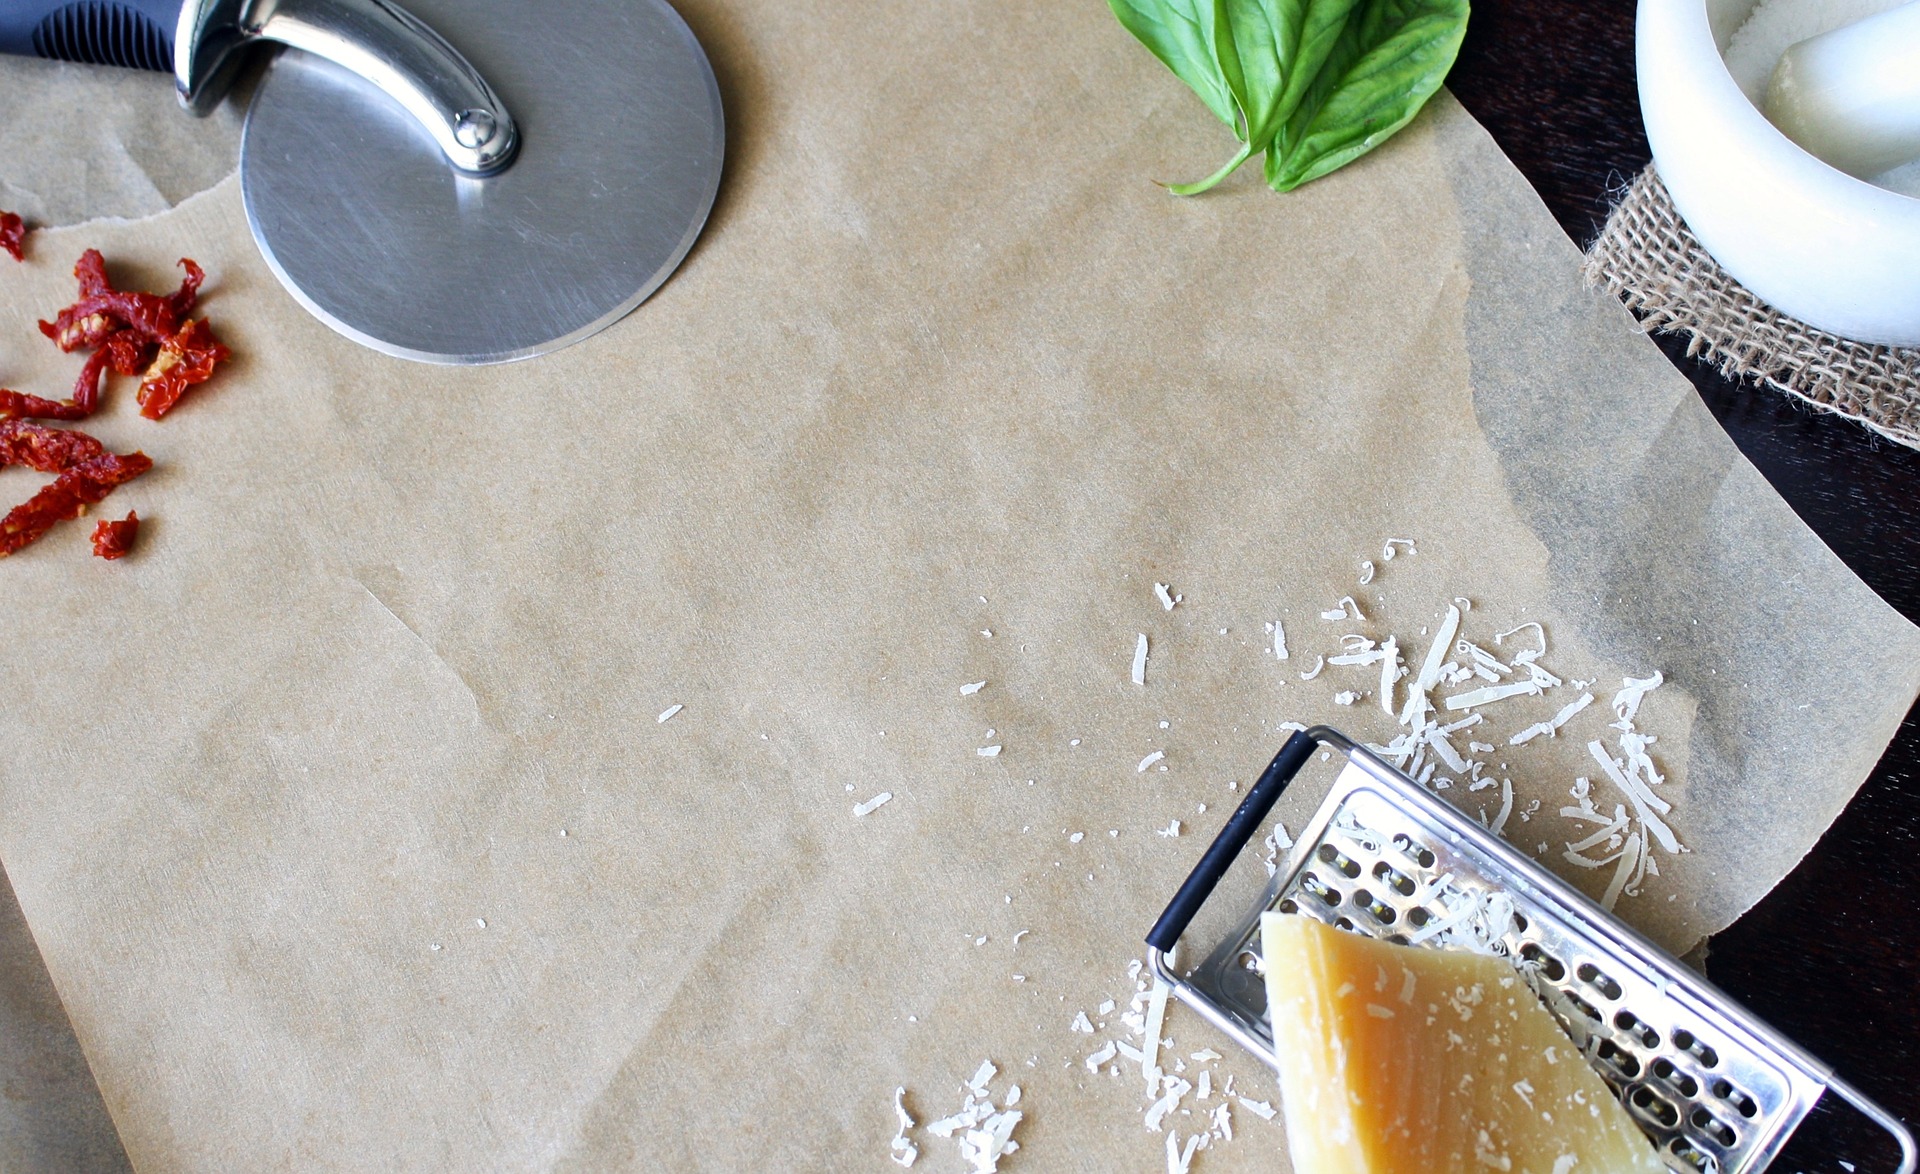 Wax Paper vs. Parchment Paper, What is the Difference?